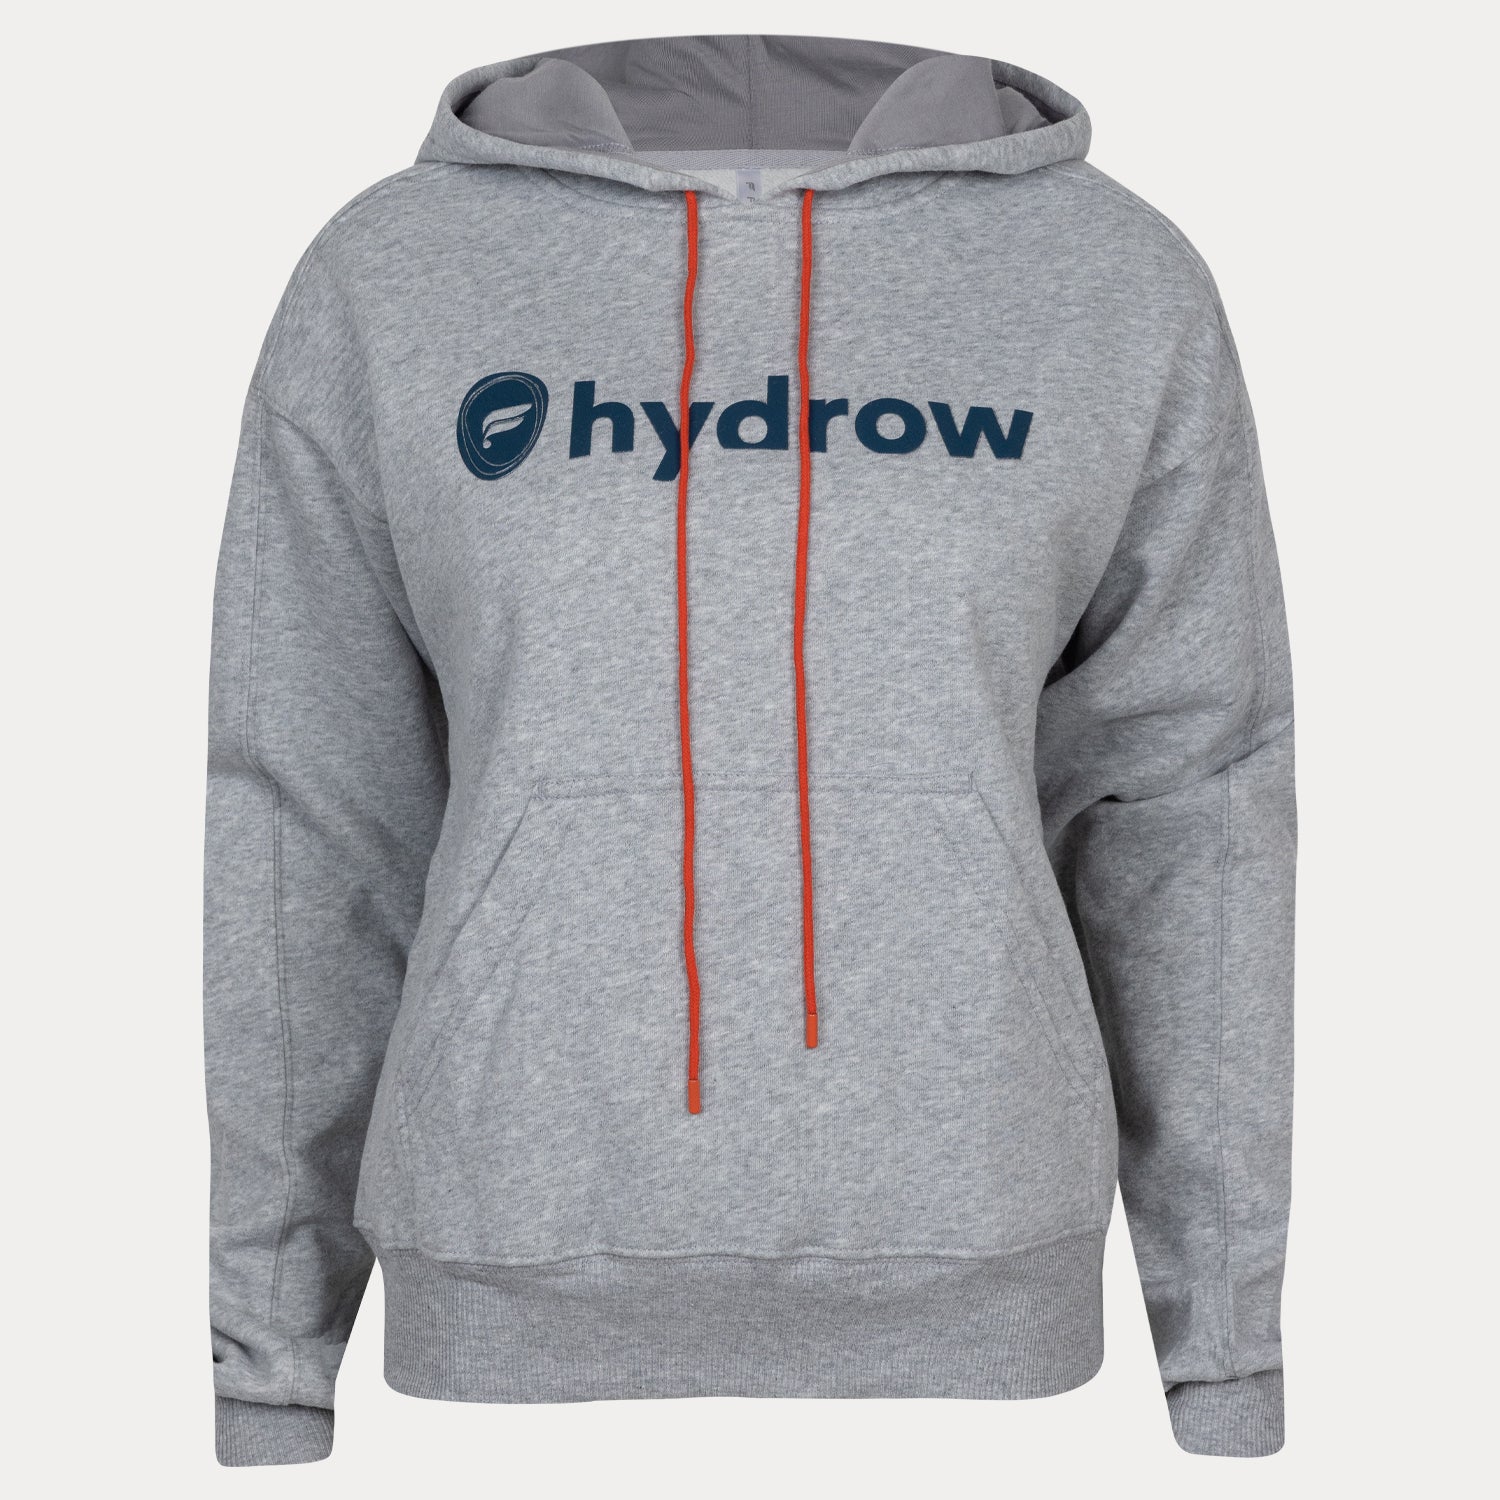 grey hoodie with dark blue Fabletics and hydrow logo on front and red drawstring